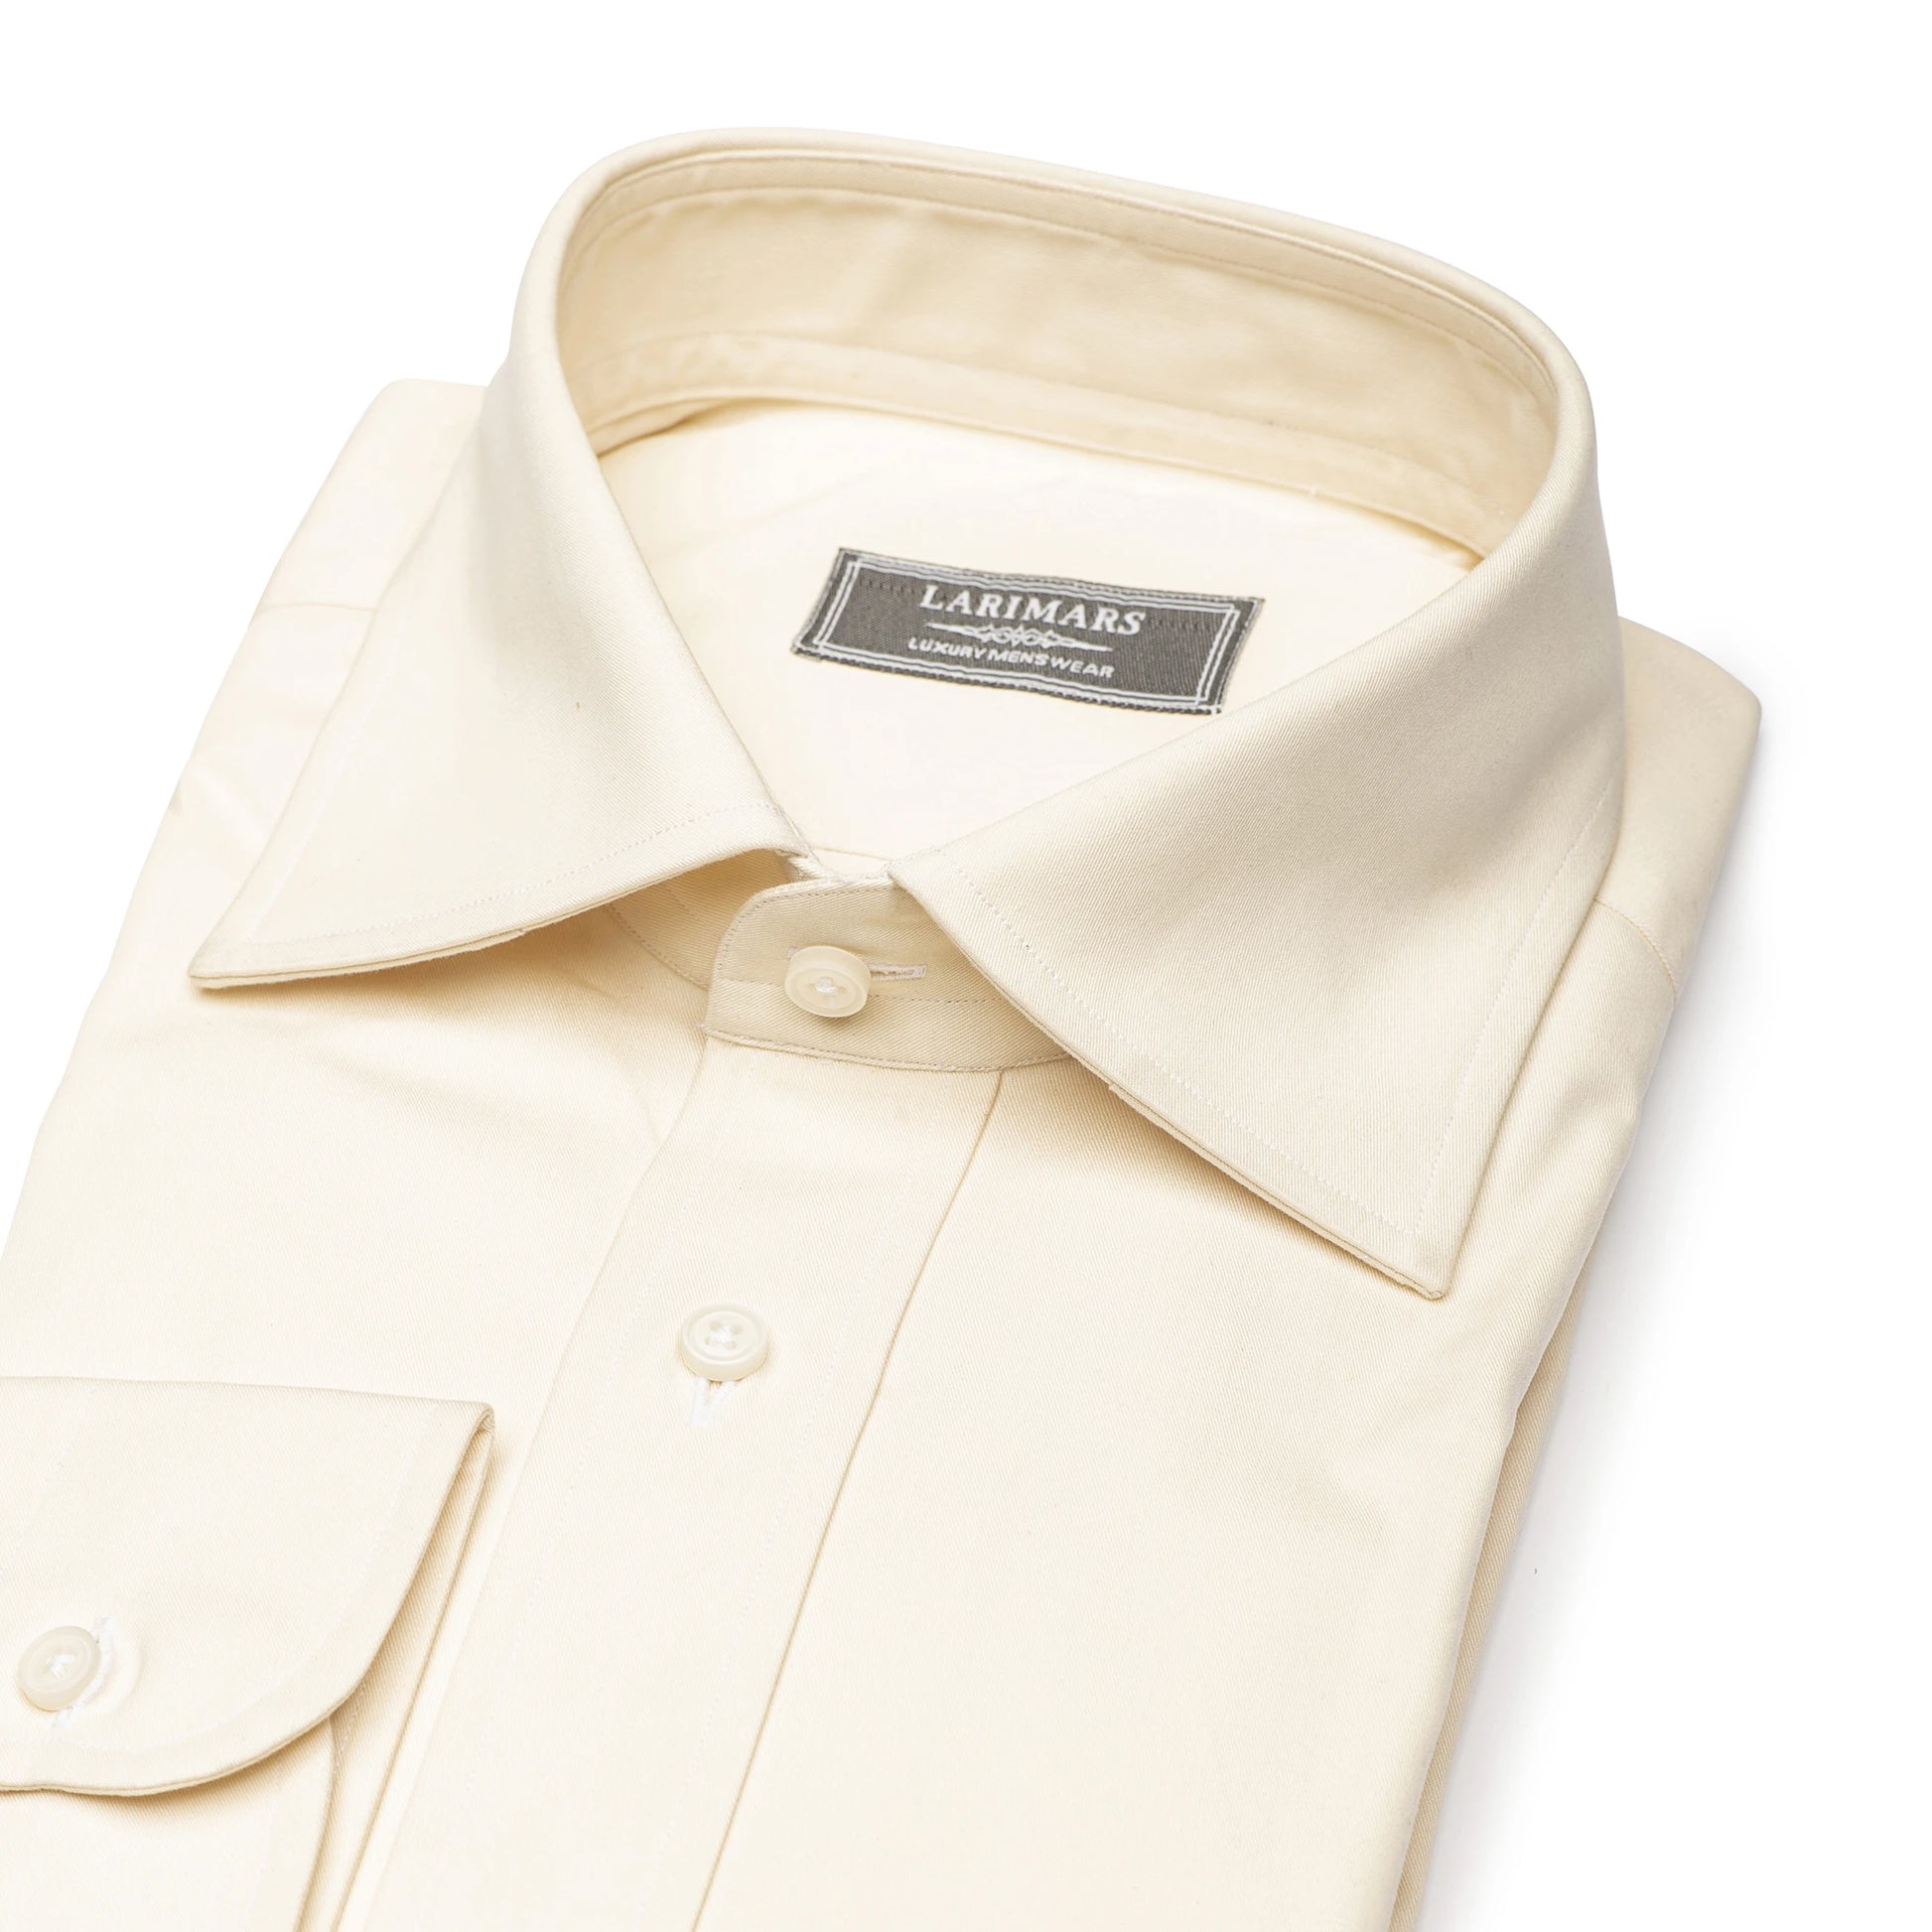 Beige Fine Twill - Larimars Clothing Men's Formal and casual wear shirts